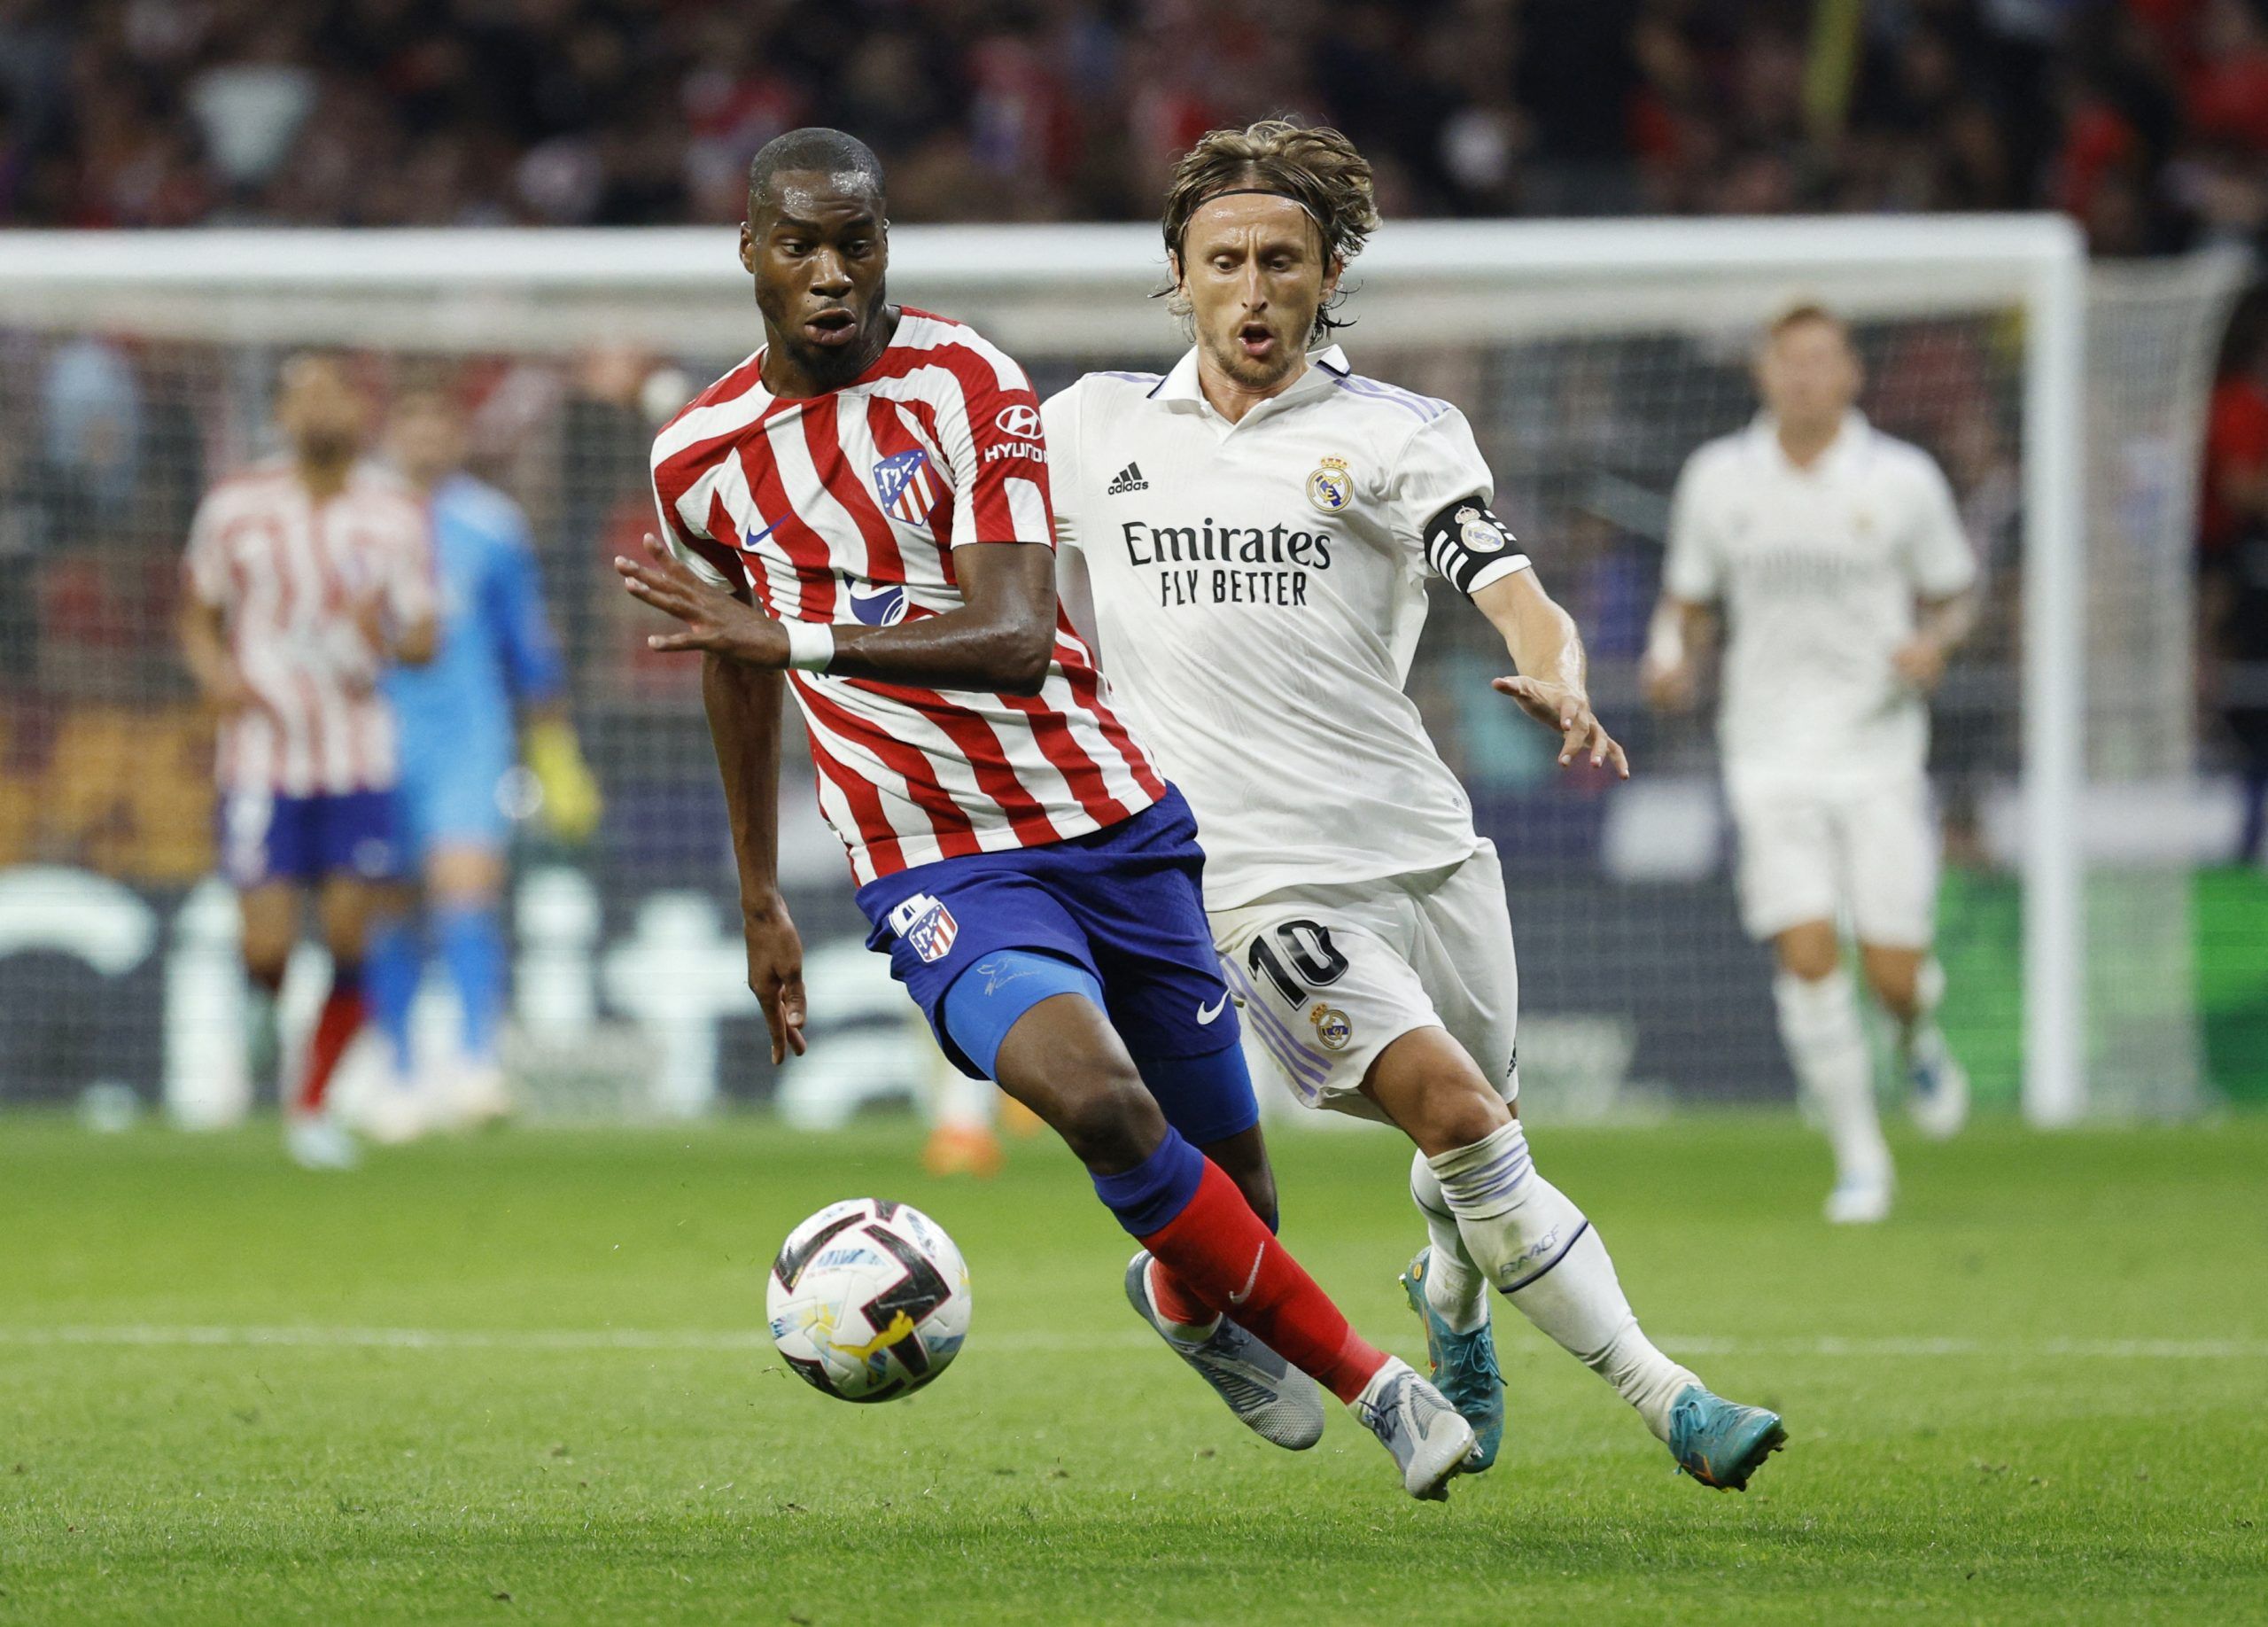 Atletico Madrid's Geoffrey Kondogbia in action with Real Madrid's Luka Modric